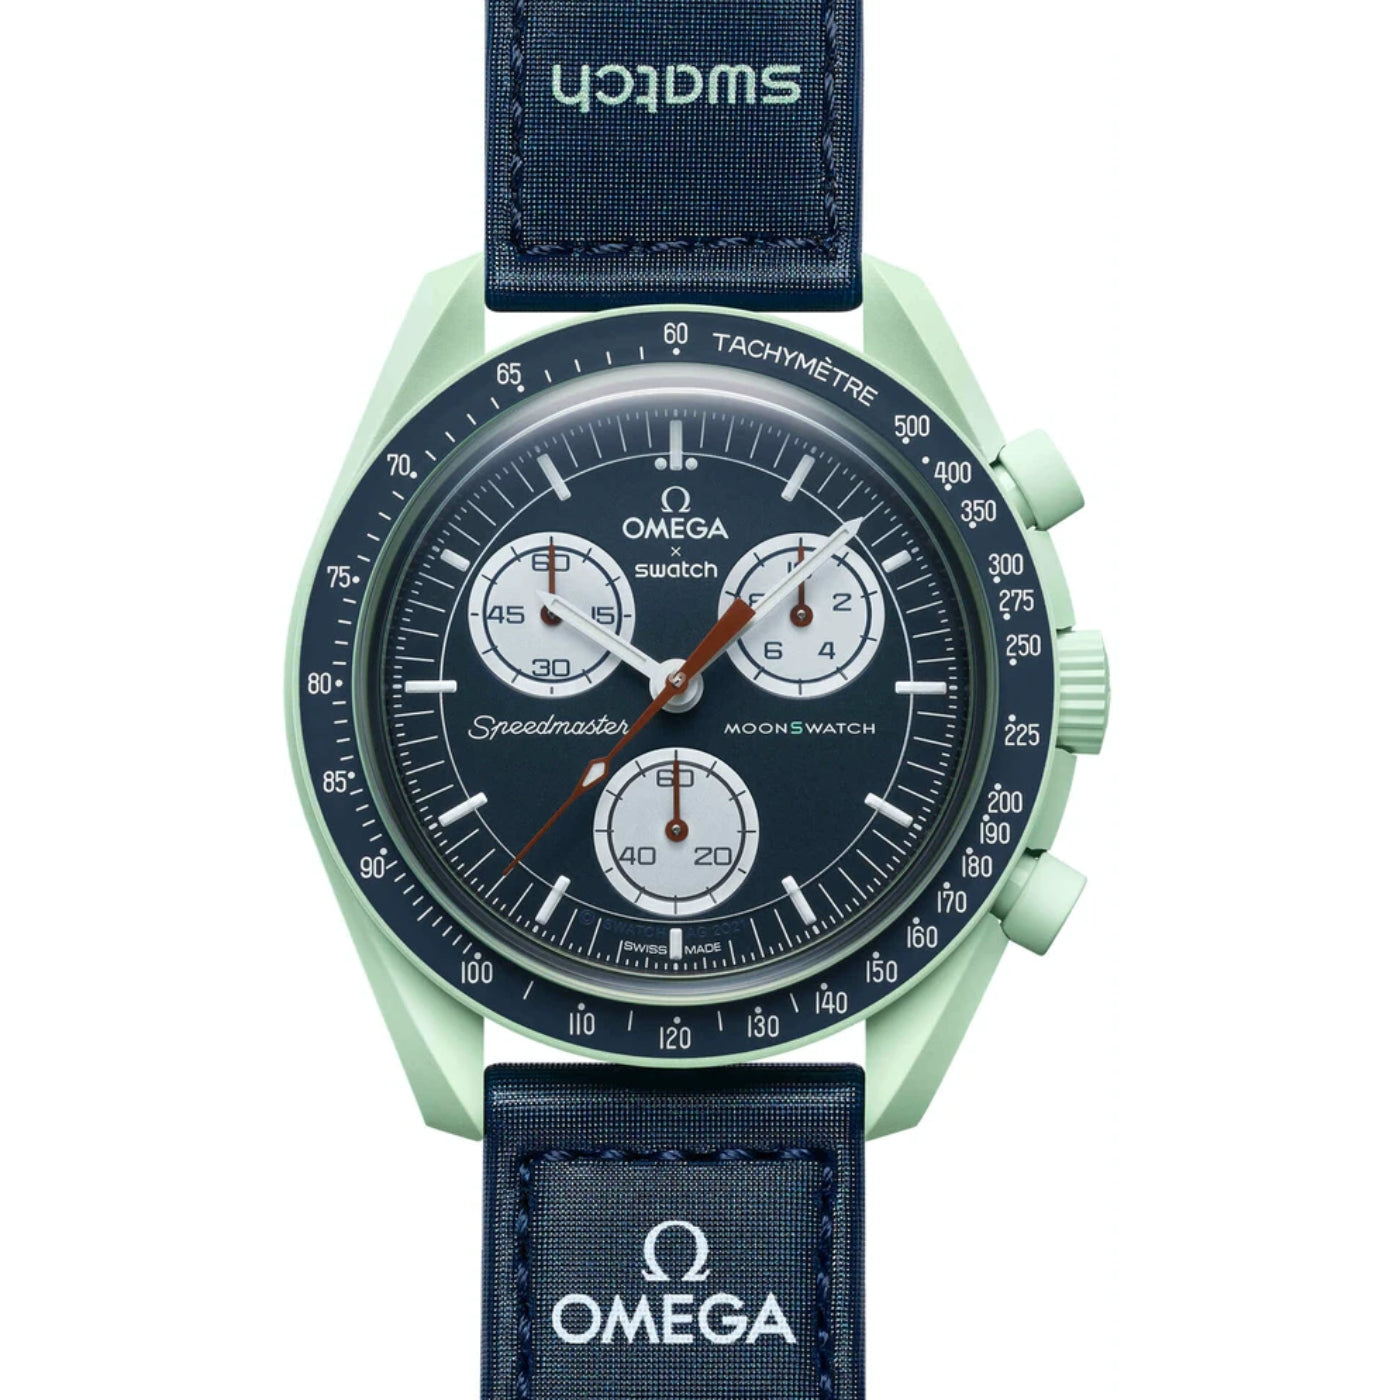 SWATCH X OMEGA BIOCERAMIC MOONSWATCH MISSION TO EARTH